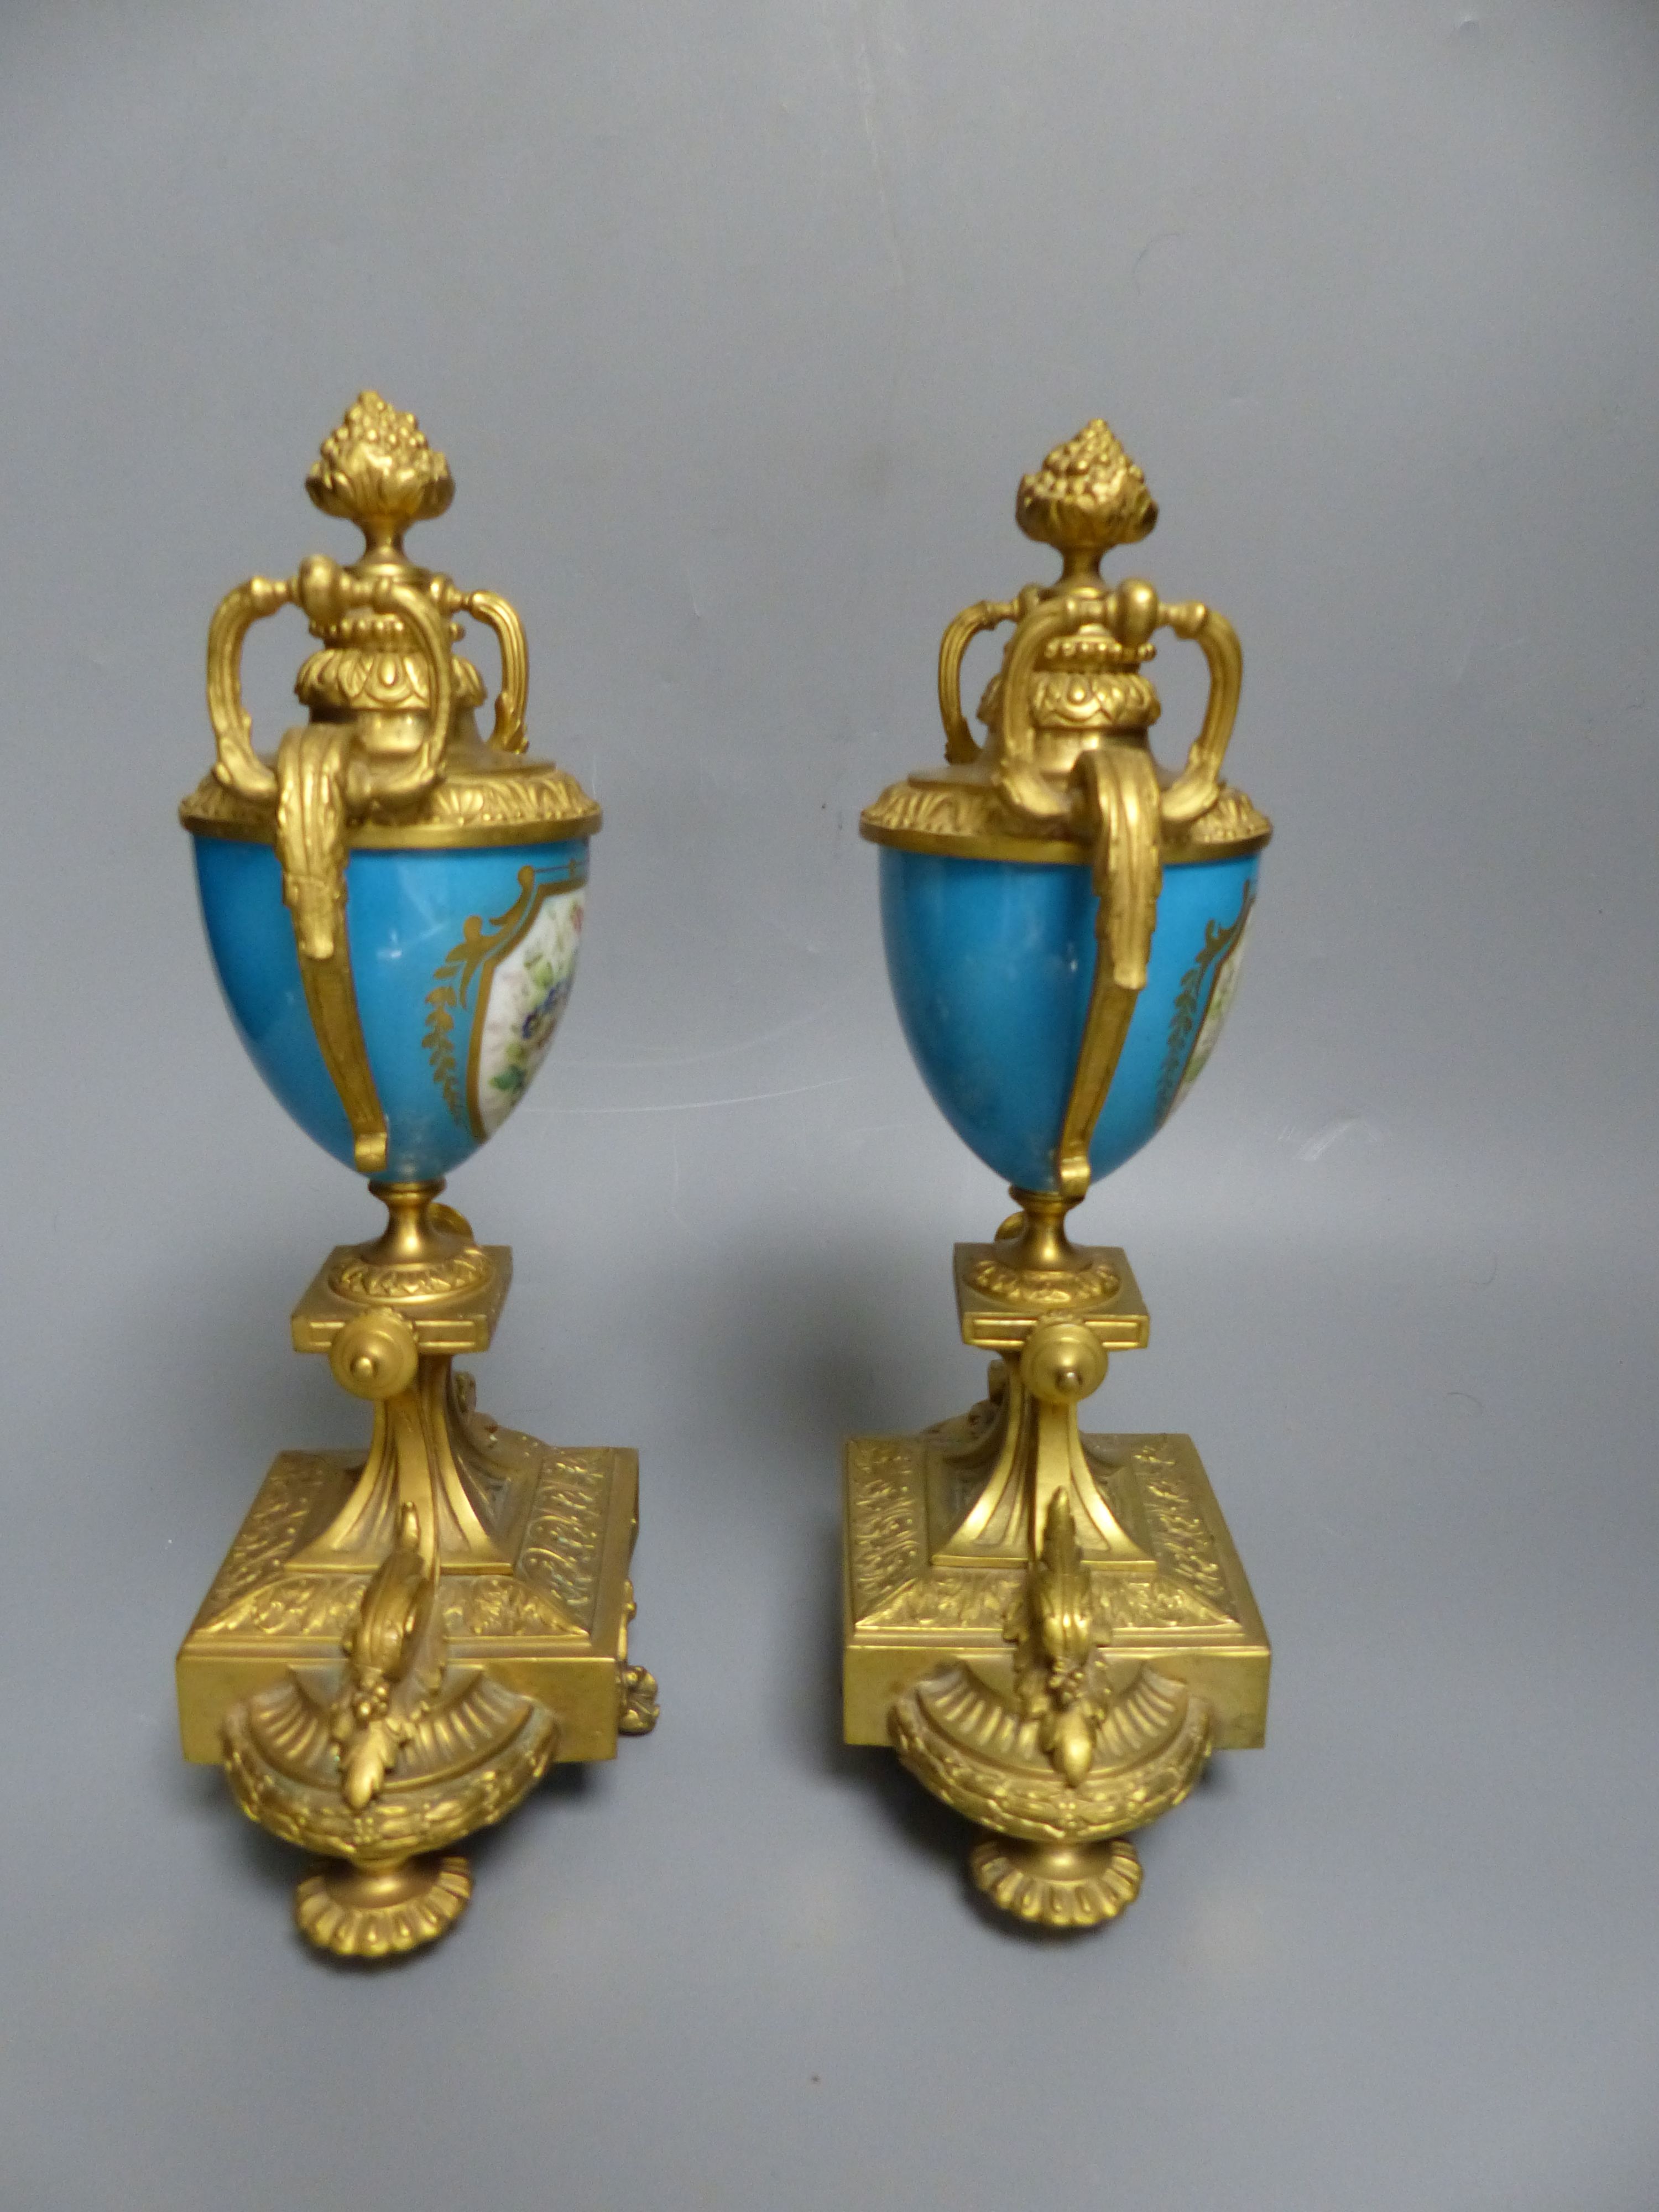 A pair of 19th century French ormolu and Sevres style porcelain urns, decorated with flowers and landscapes, height 26.5cm